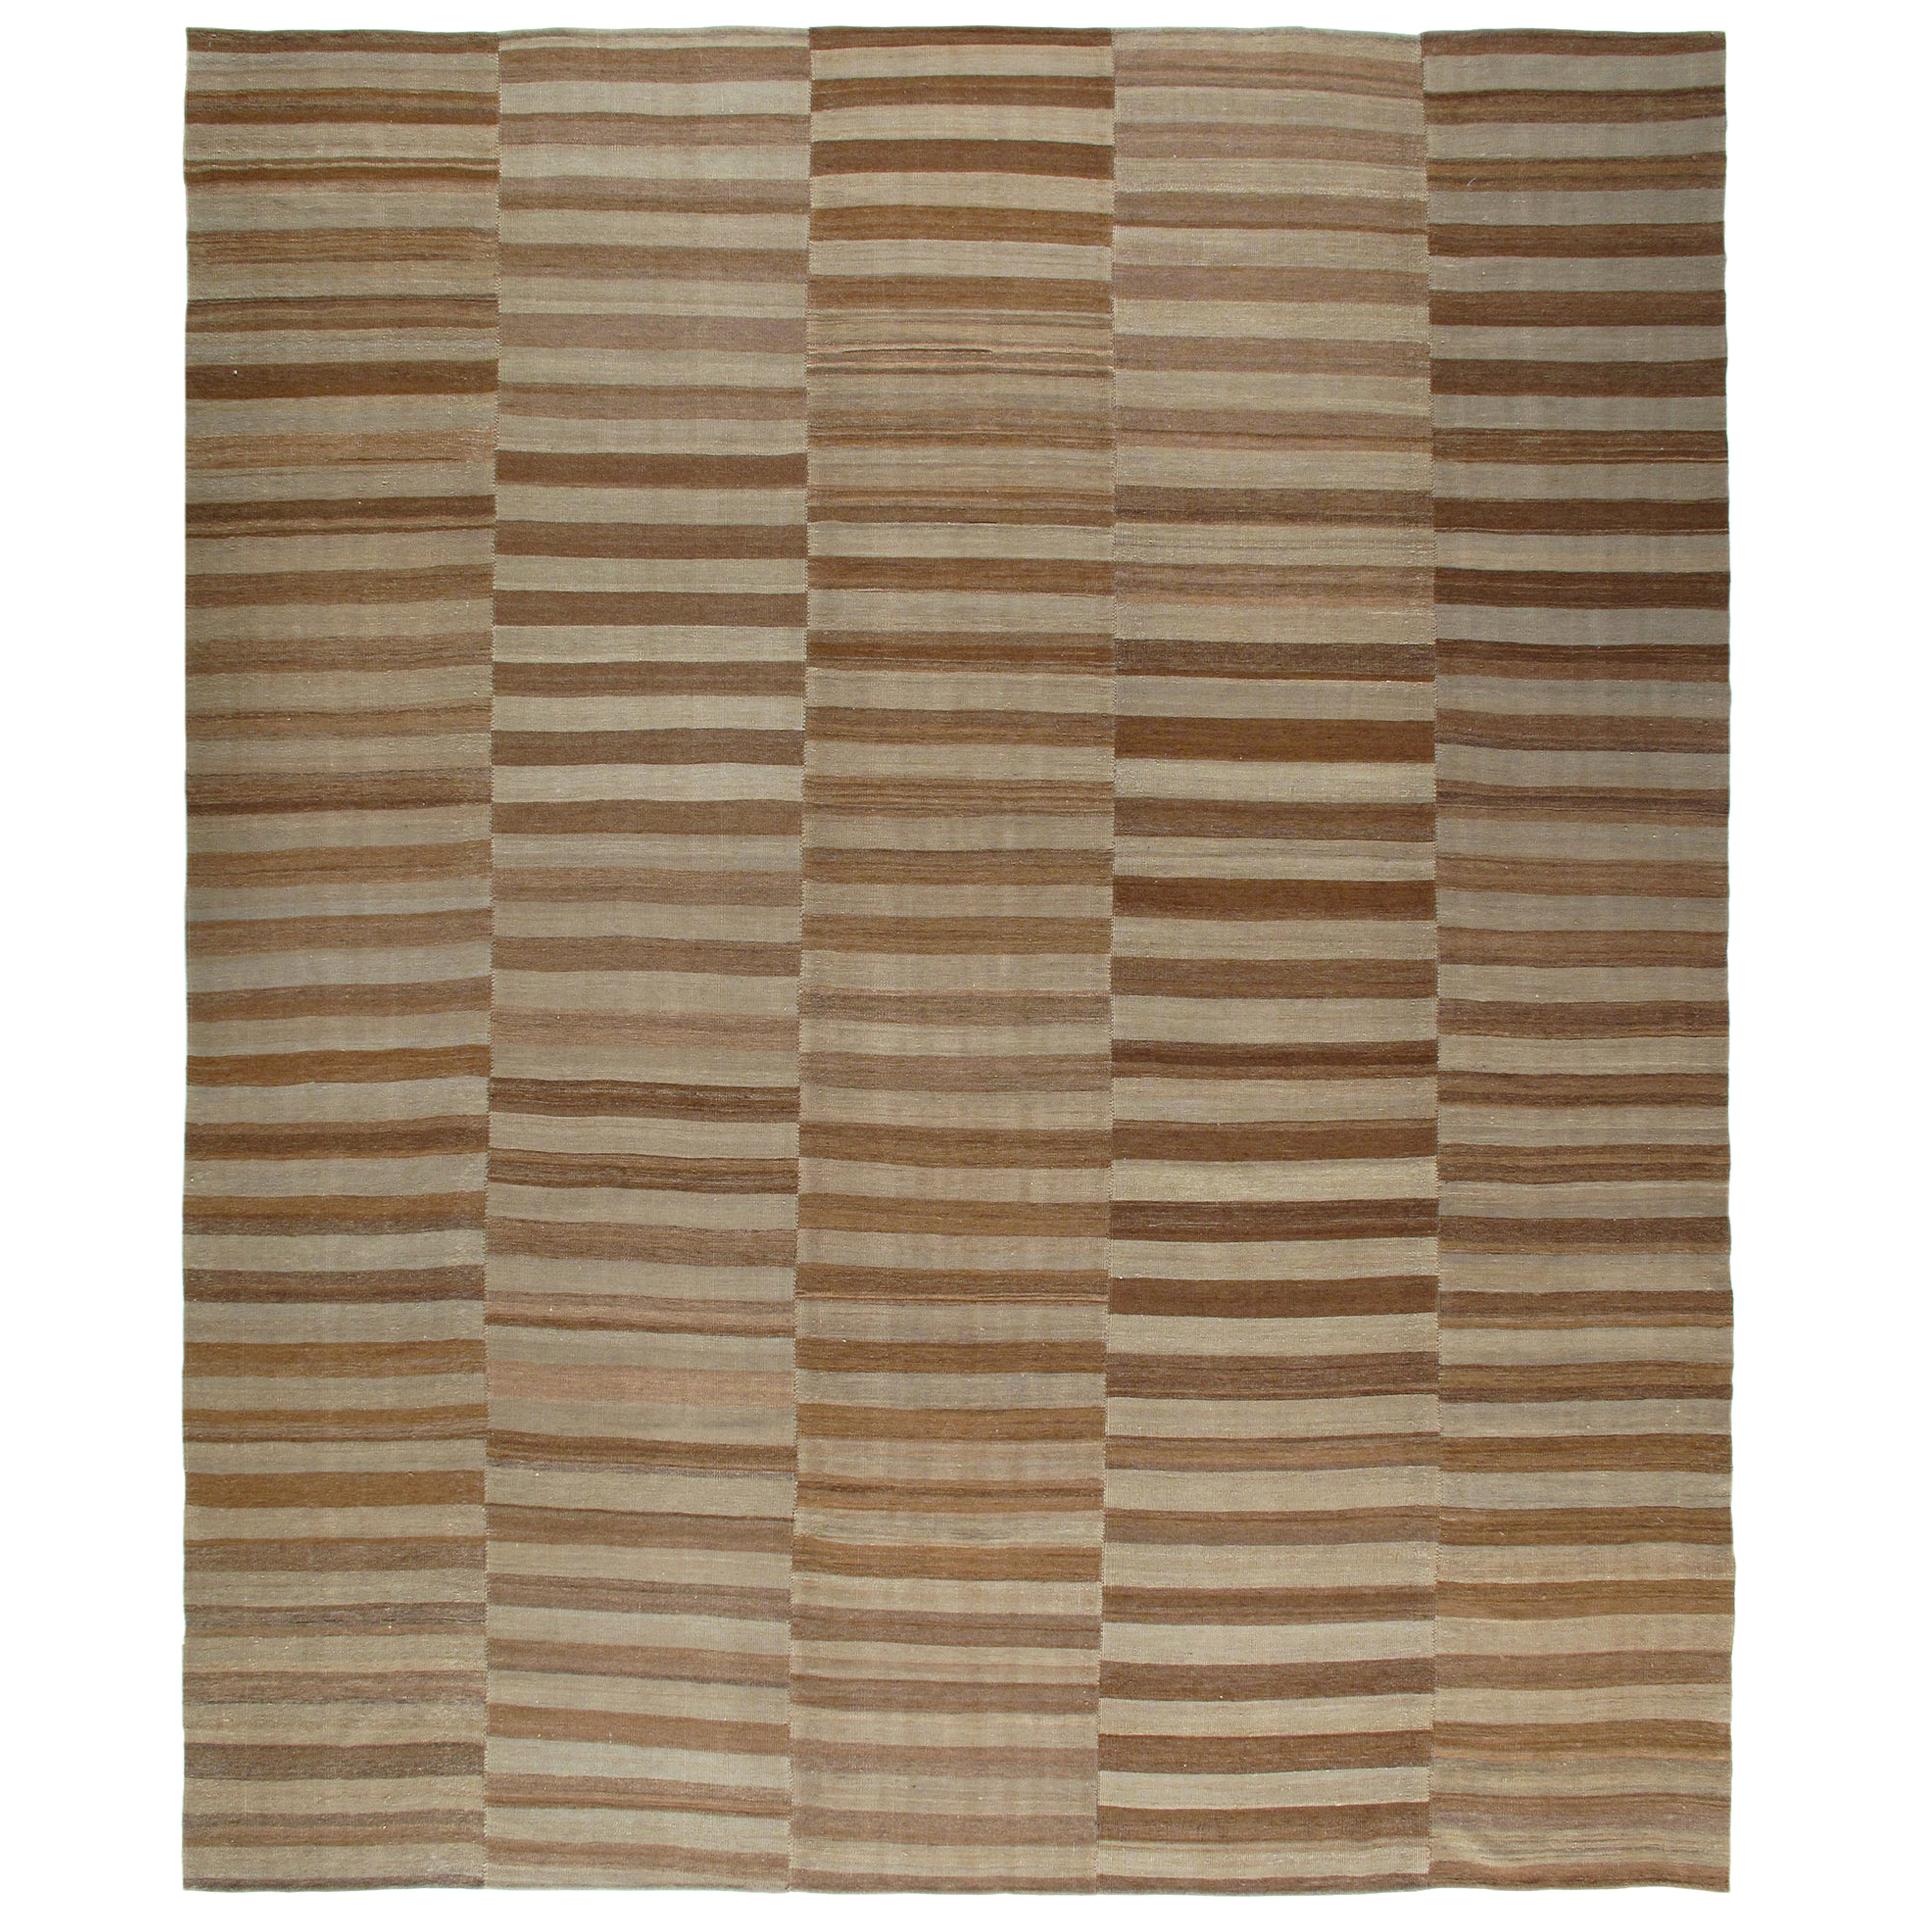 Modern Shiraz Handwoven Flatweave Rug in Brown and Beige Color